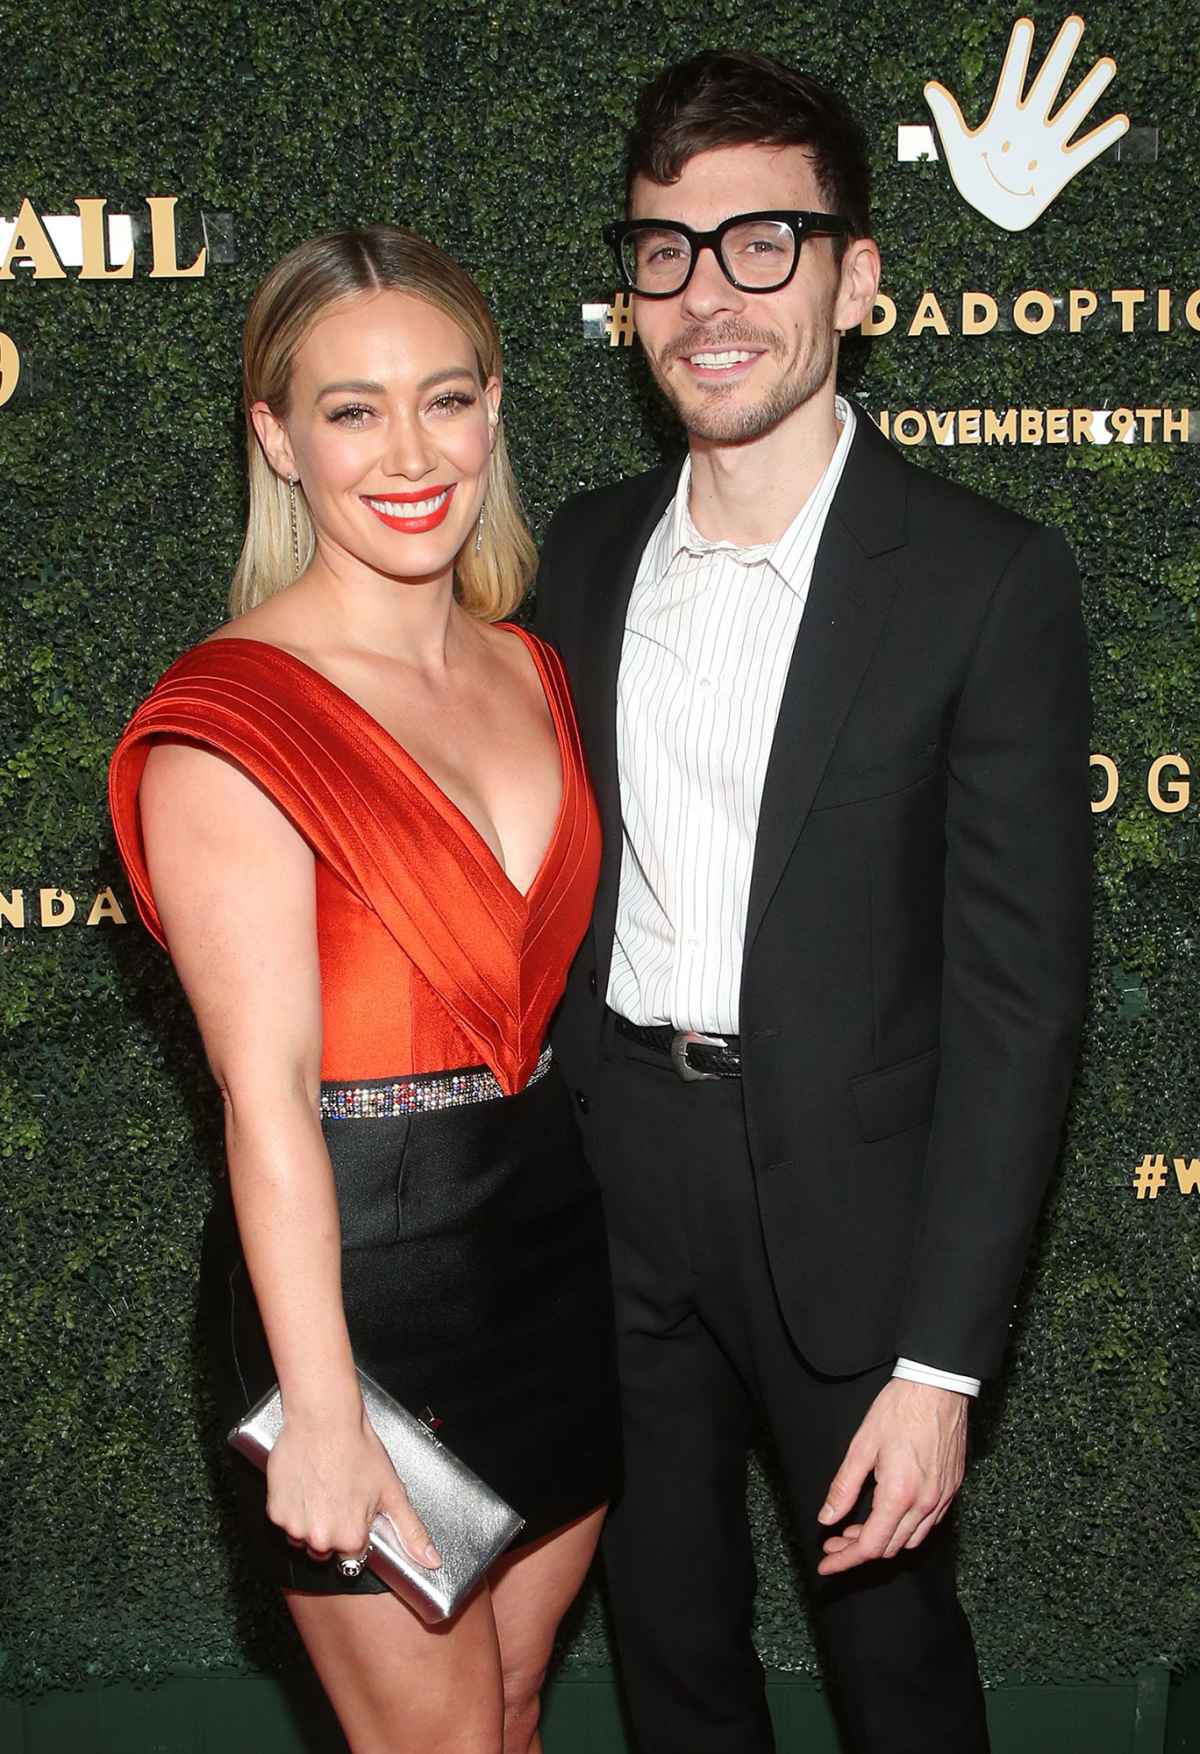 Hilary Duff Blushes As Husband Matthew Koma Tries To Flag Her Ex Us Weekly 6408